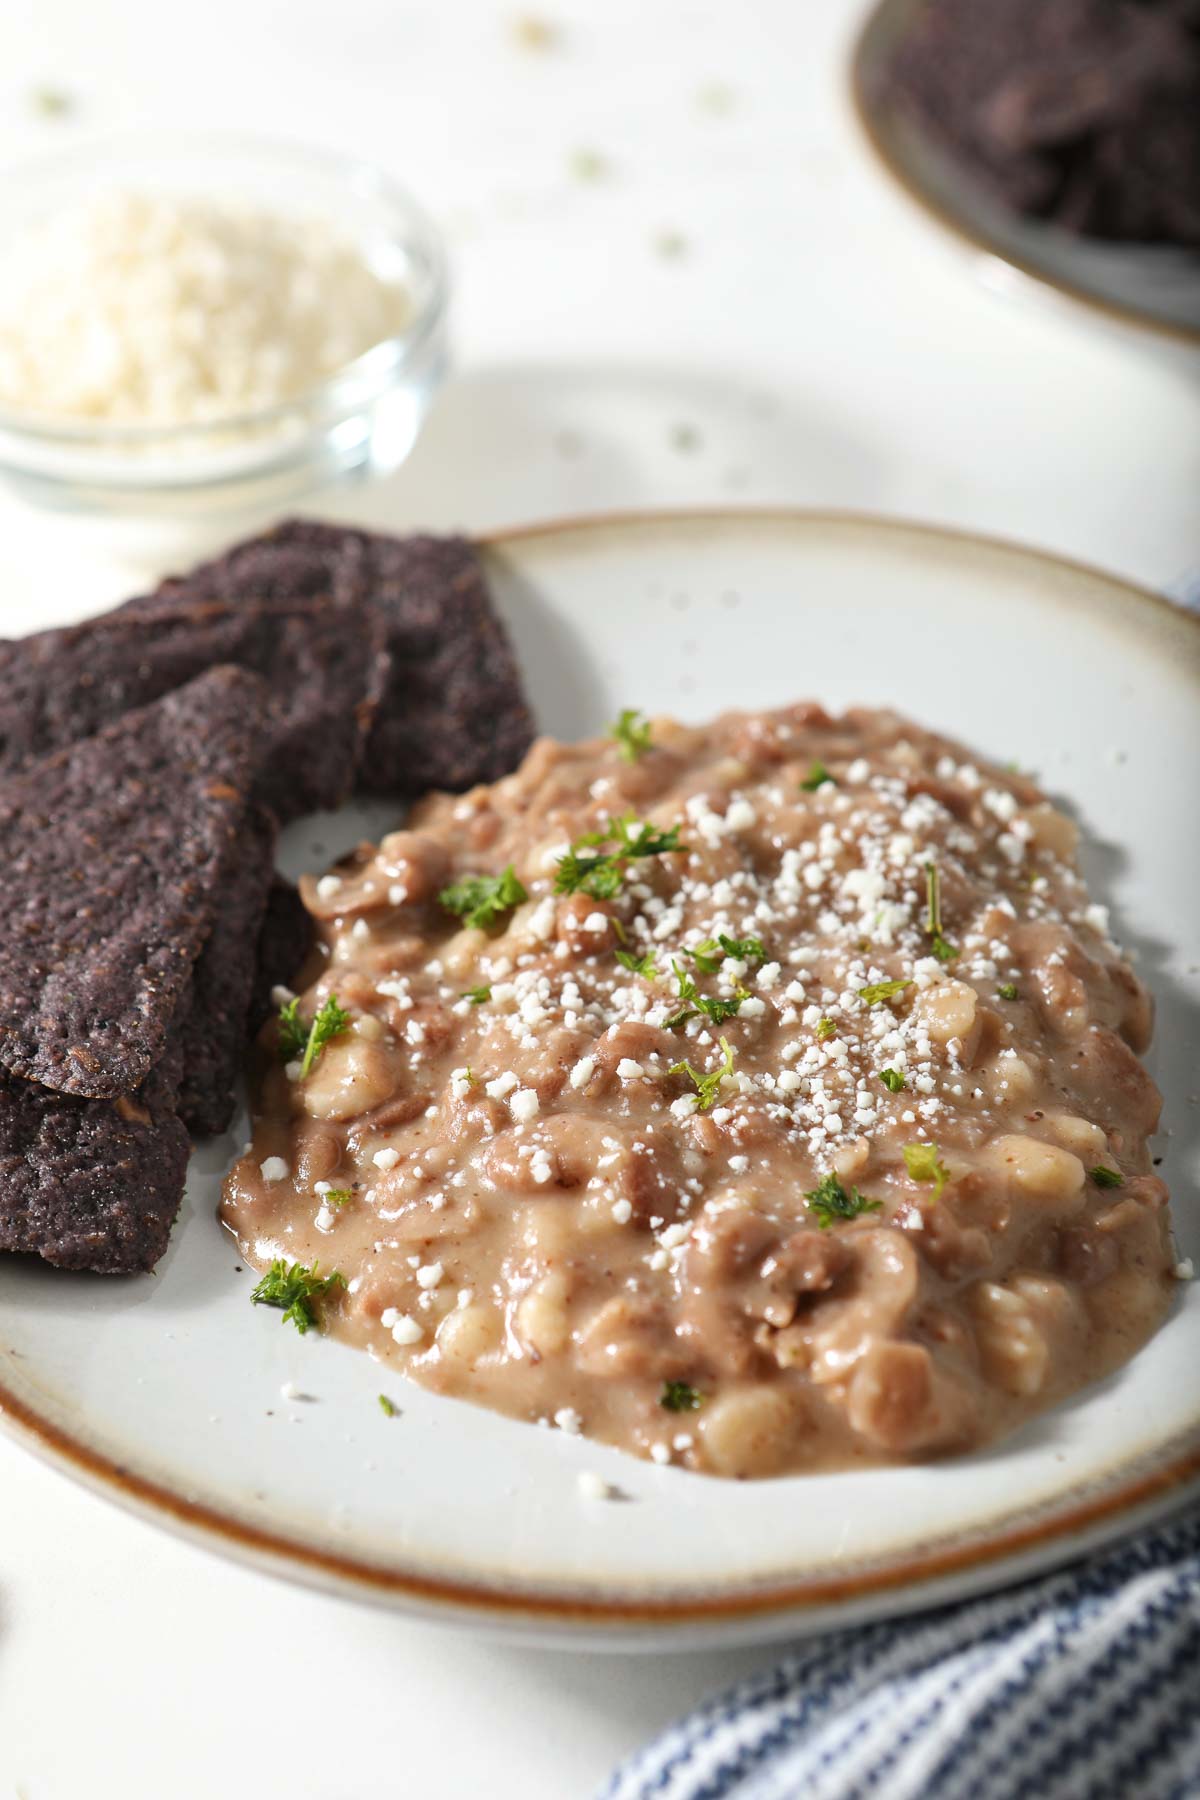 Refried beans on plate with blue corn tortilla chips.